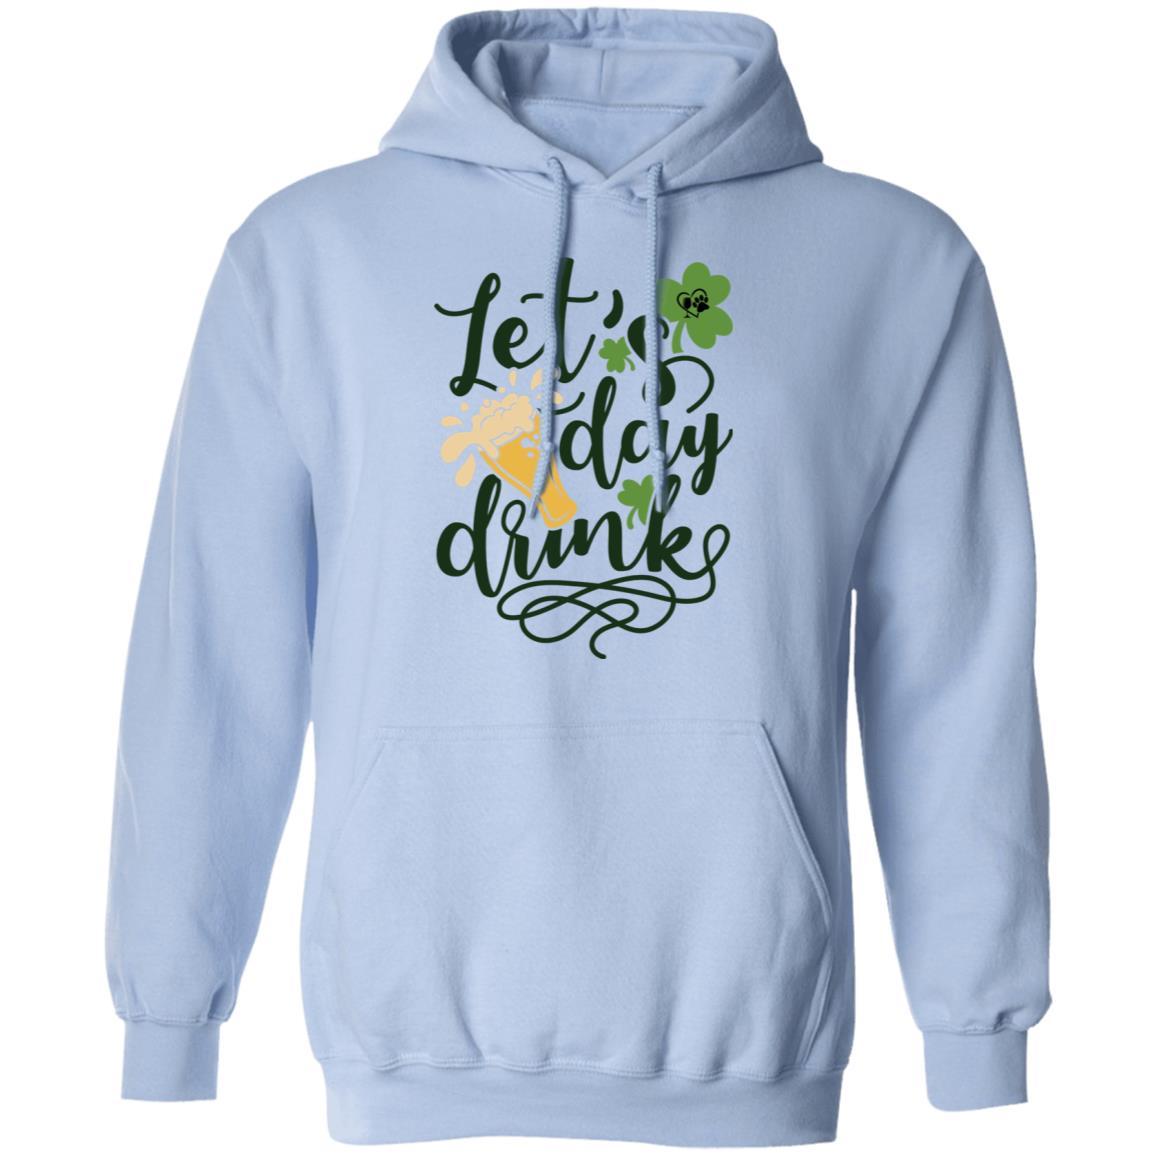 Sweatshirts Light Blue / S Winey Bitches Co  "Let's Day Drink" Pullover Hoodie 8 oz. WineyBitchesCo